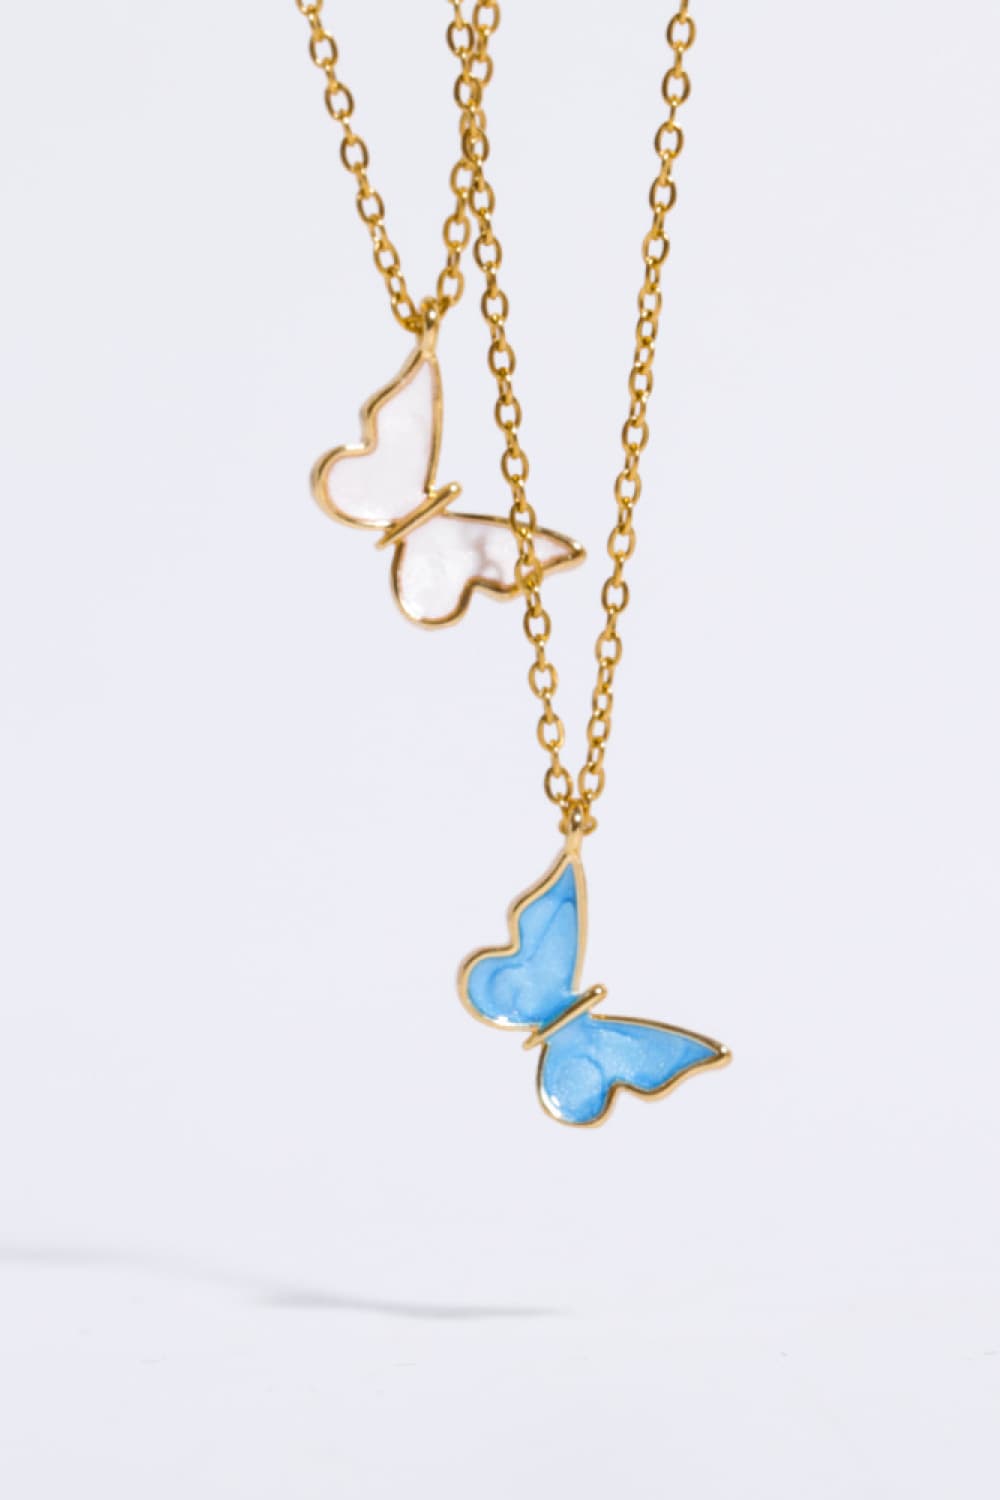 Trendsi Cupid Beauty Supplies Women Necklace Butterfly Pendant Copper 14K Gold-Plated Necklace